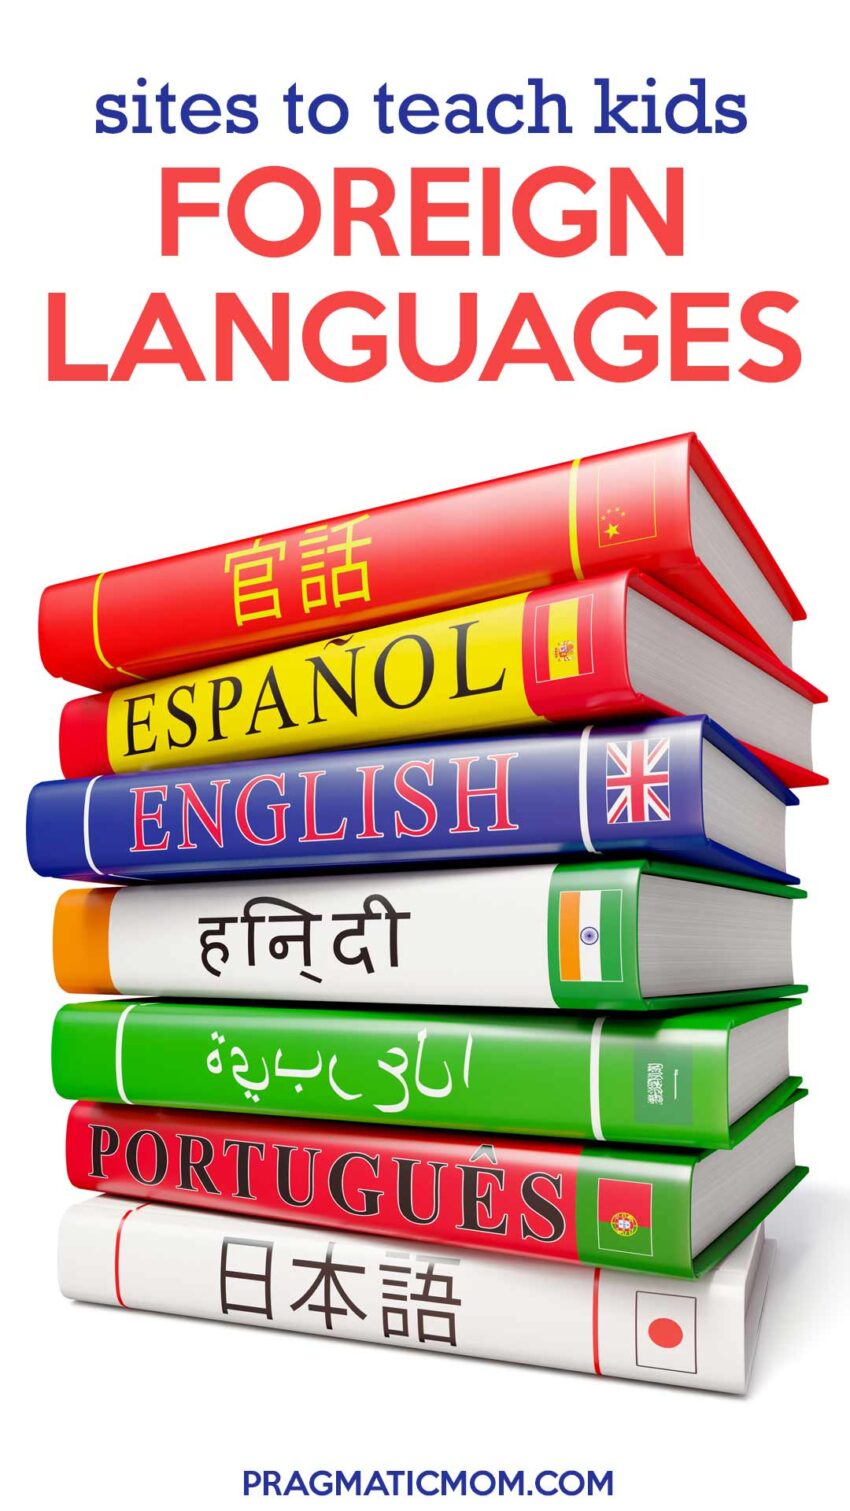 Sites to Teach Kids Foreign Languages